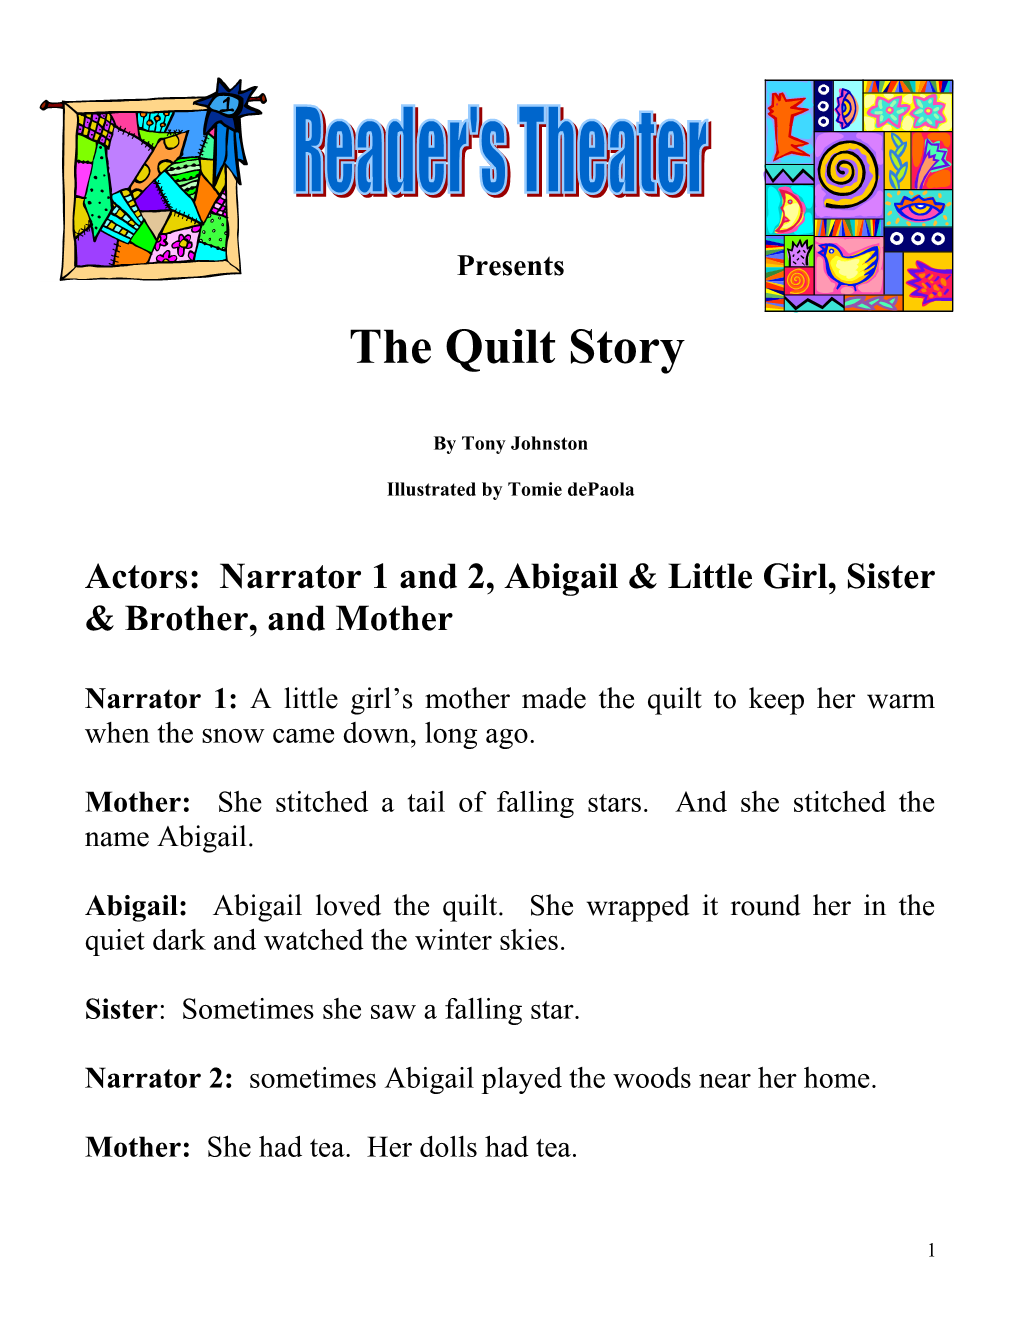 Actors: Narrator 1 and 2, Abigail & Little Girl, Sister & Brother, and Mother